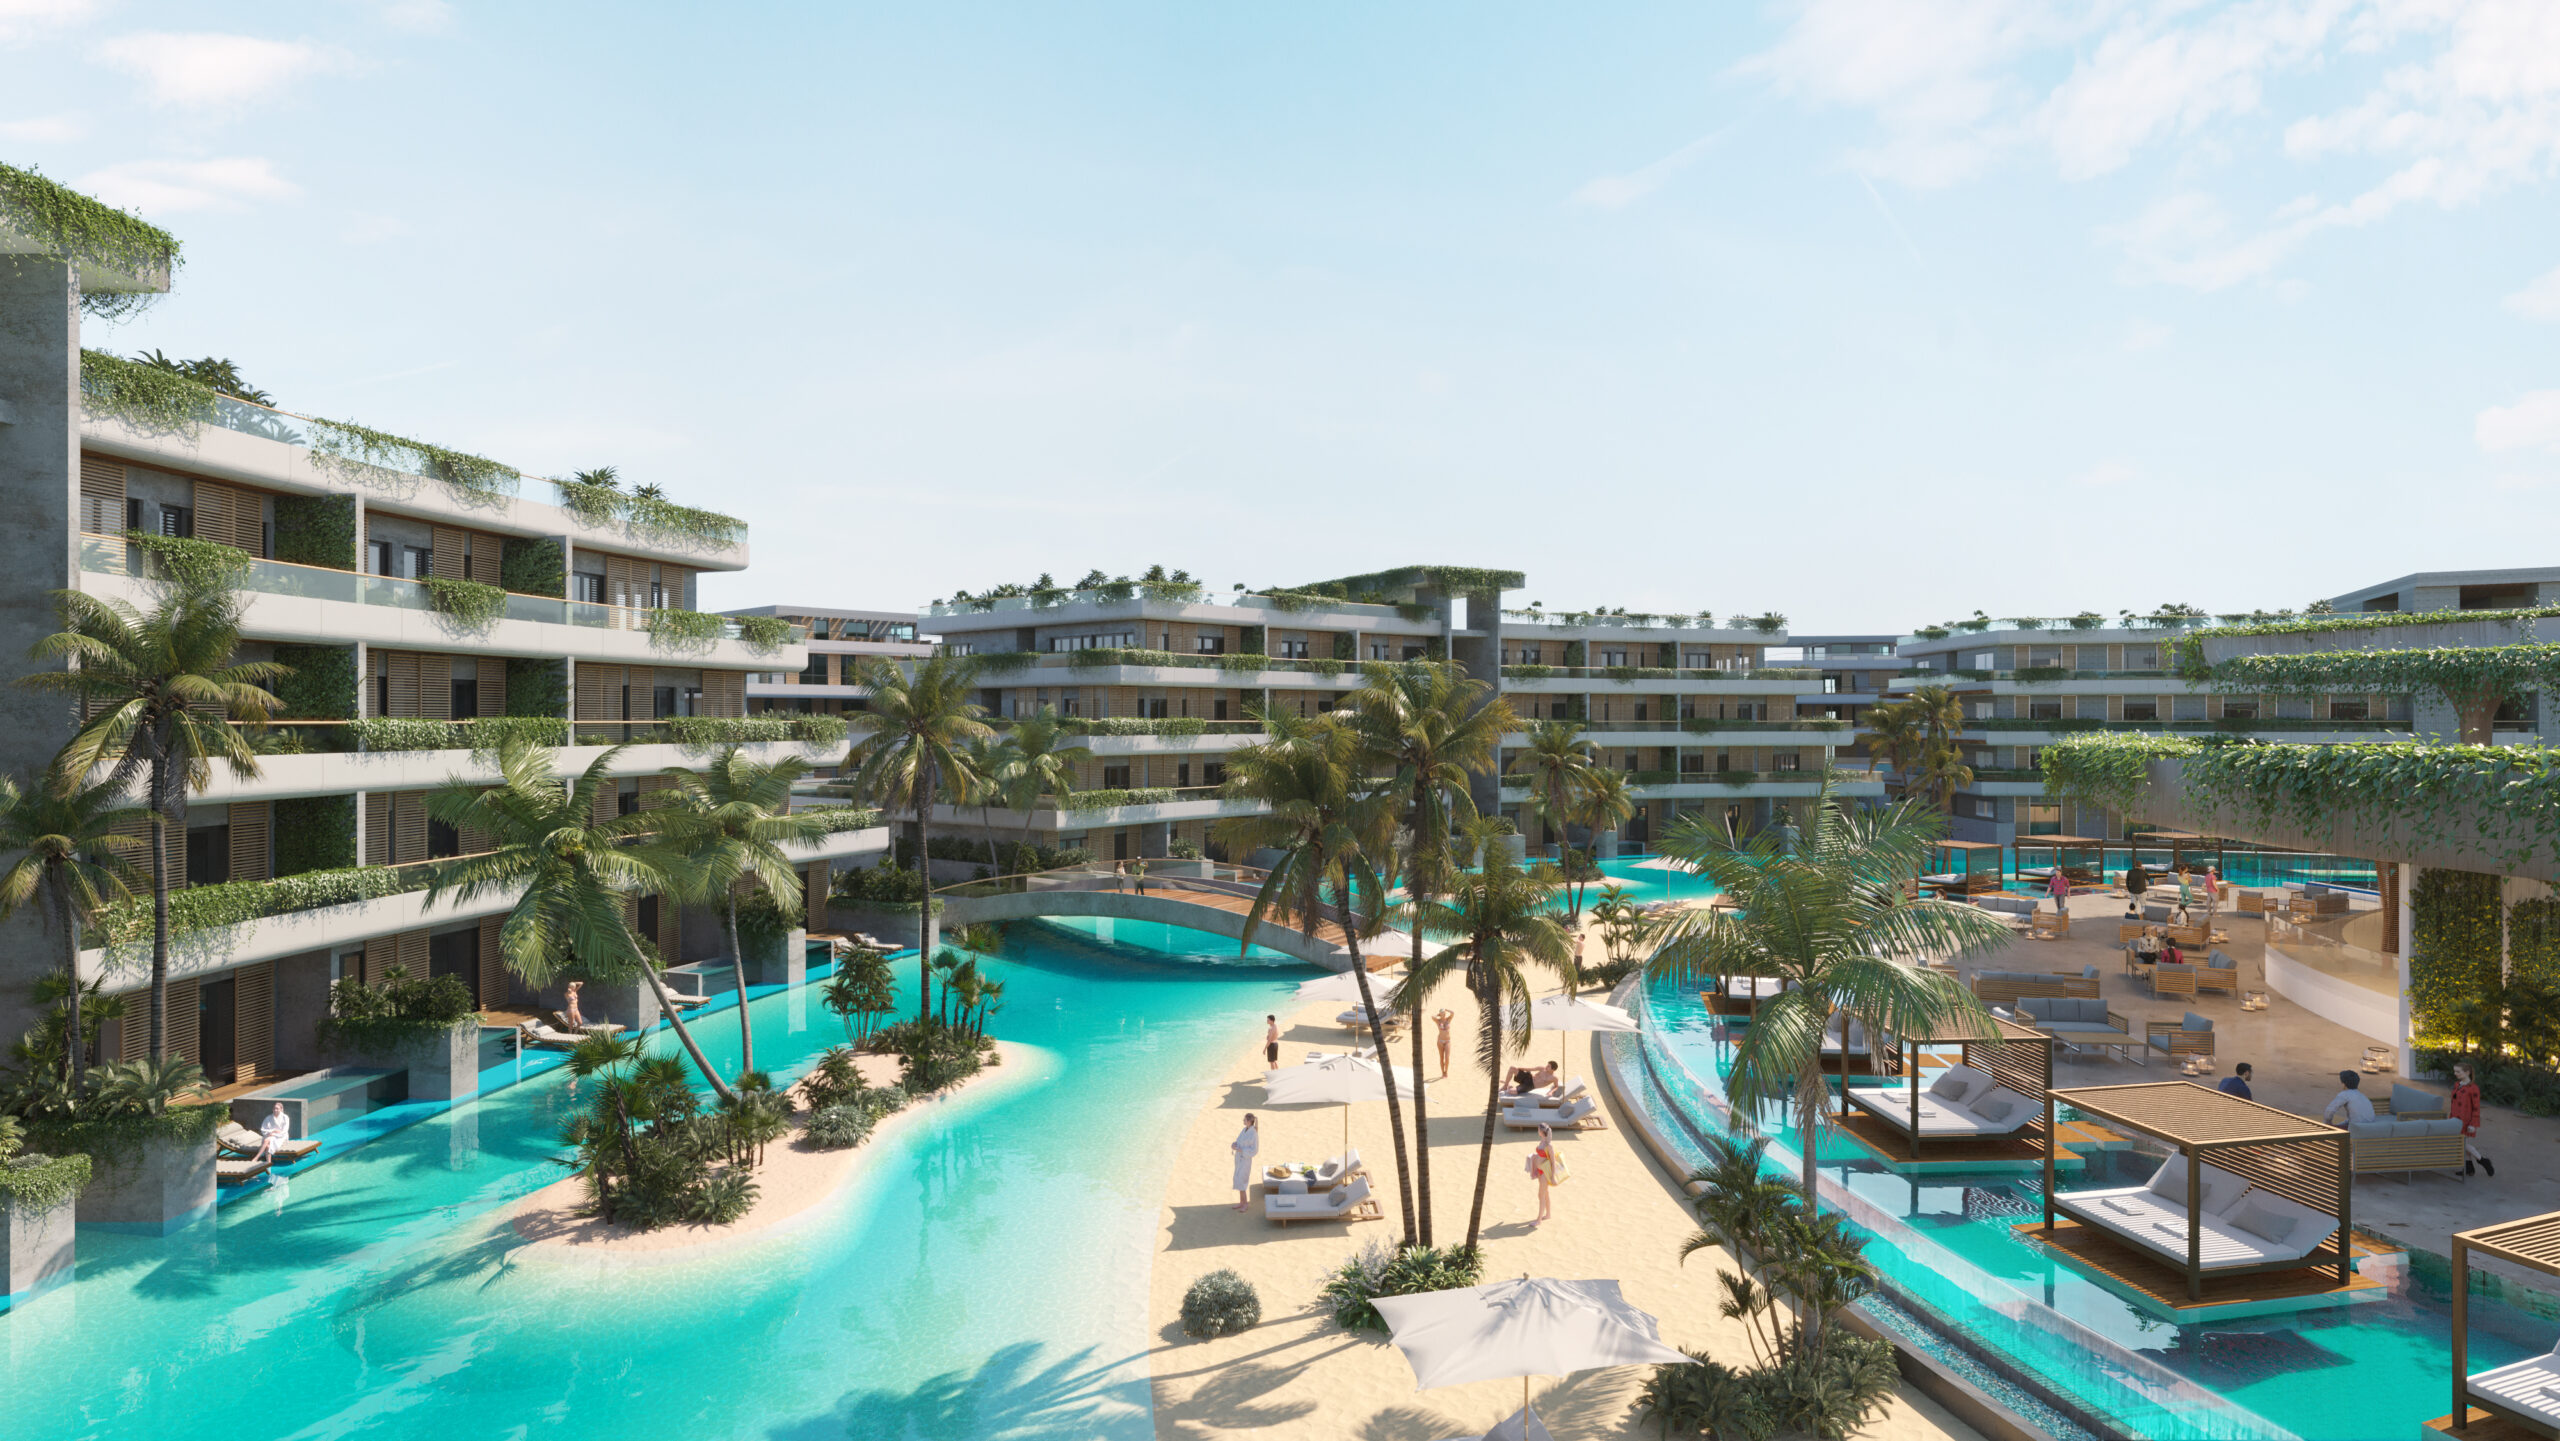 Luxury condos in Punta Cana with beautiful pools E-410